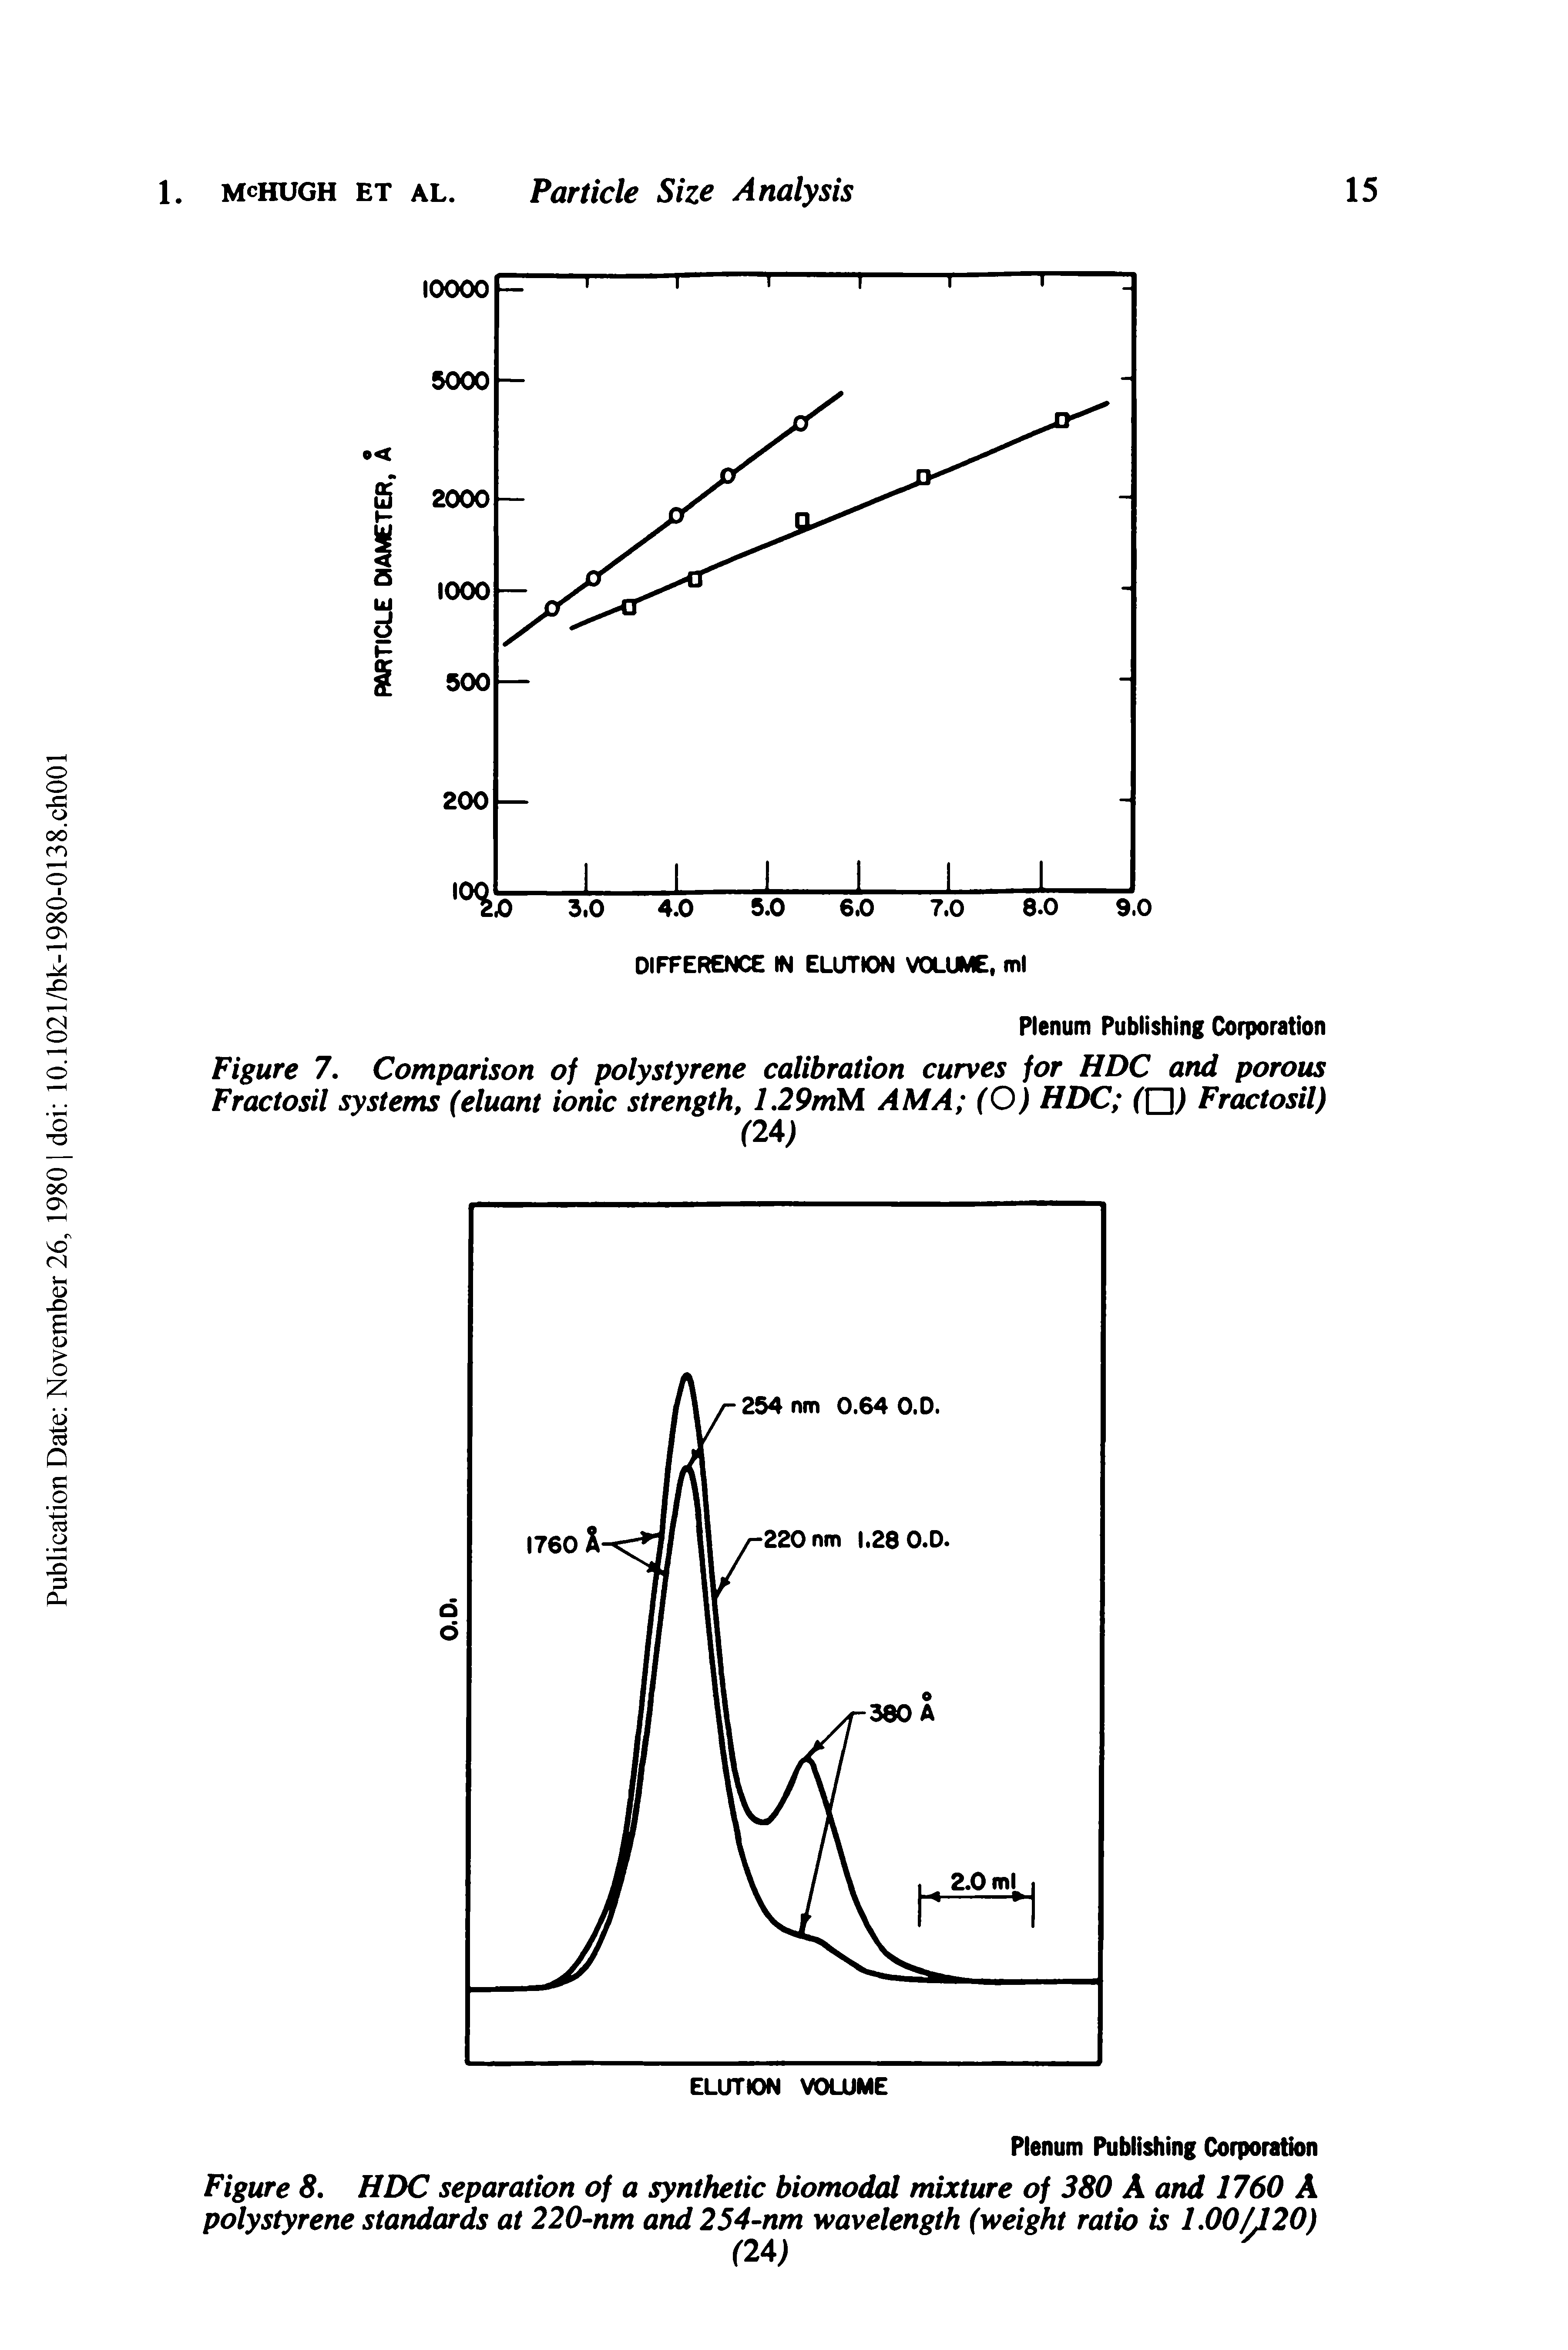 Figure 8. HDC separation of a synthetic biomodal mixture of 380 A and 1760 A polystyrene standards at 220 nm and 254 nm wavelength (weight ratio is 1.00/120)...